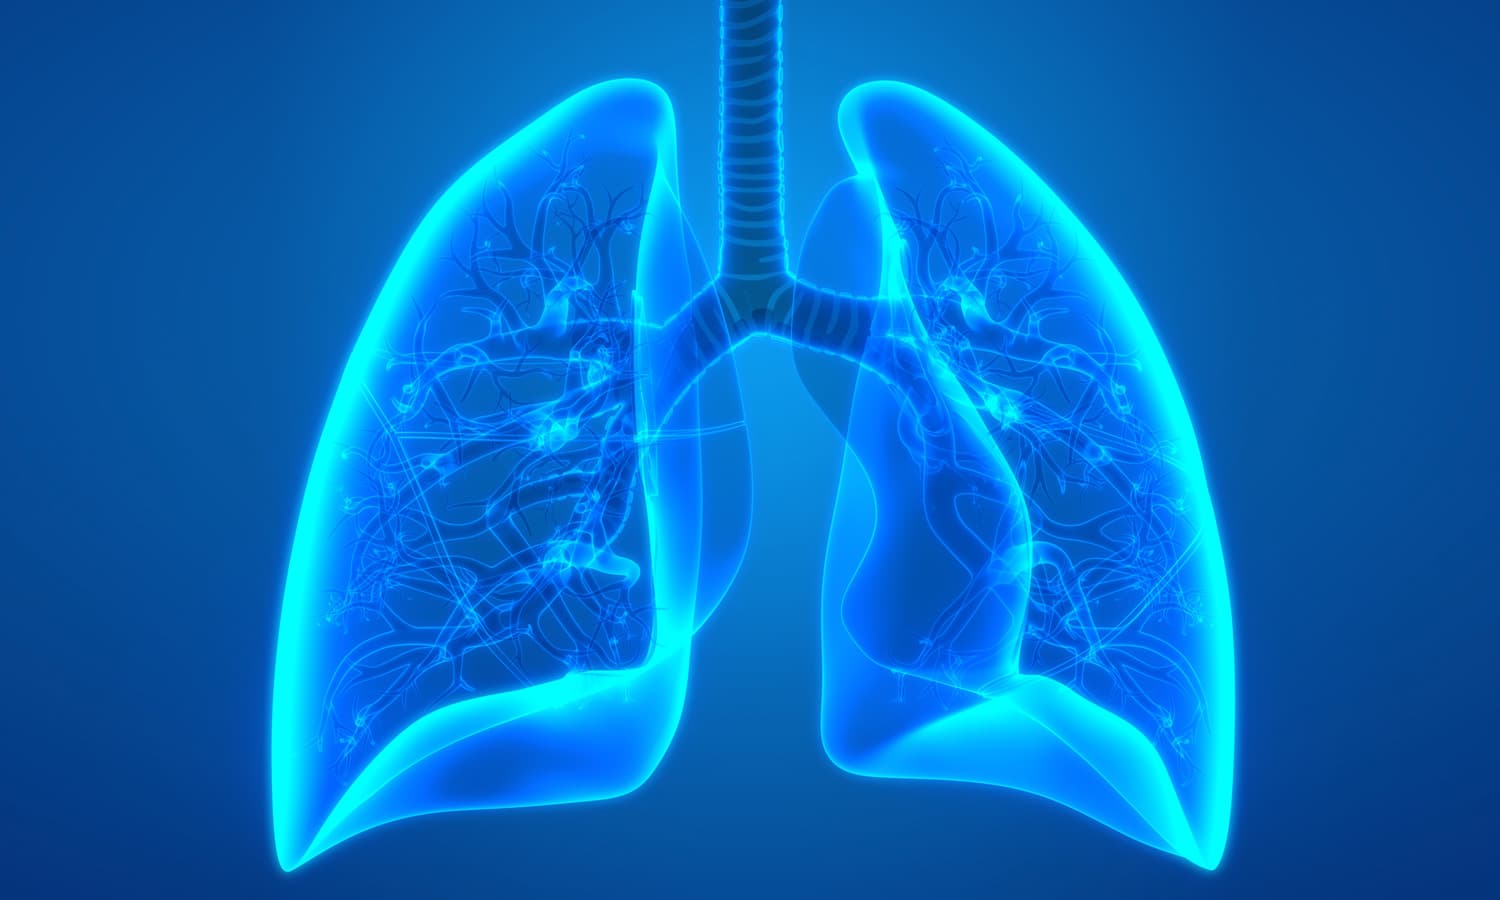 Cannabis Could Prevent Deadly Covid-19 Lung Inflammation